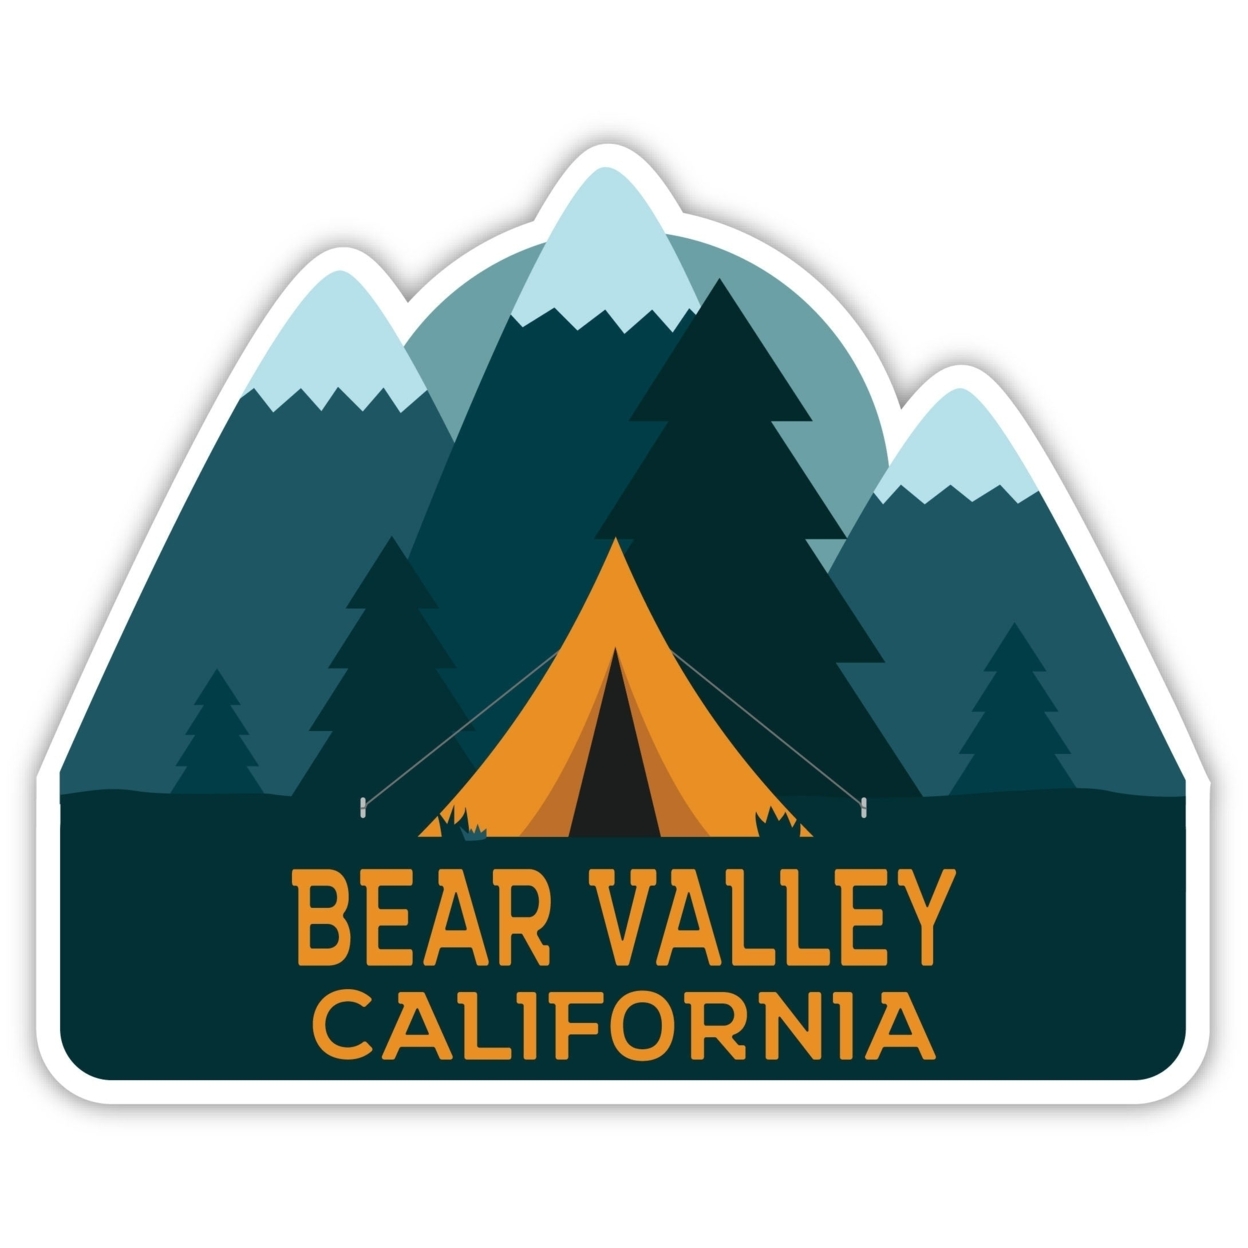 Bear Valley California Souvenir Decorative Stickers (Choose Theme And Size) - Single Unit, 4-Inch, Tent